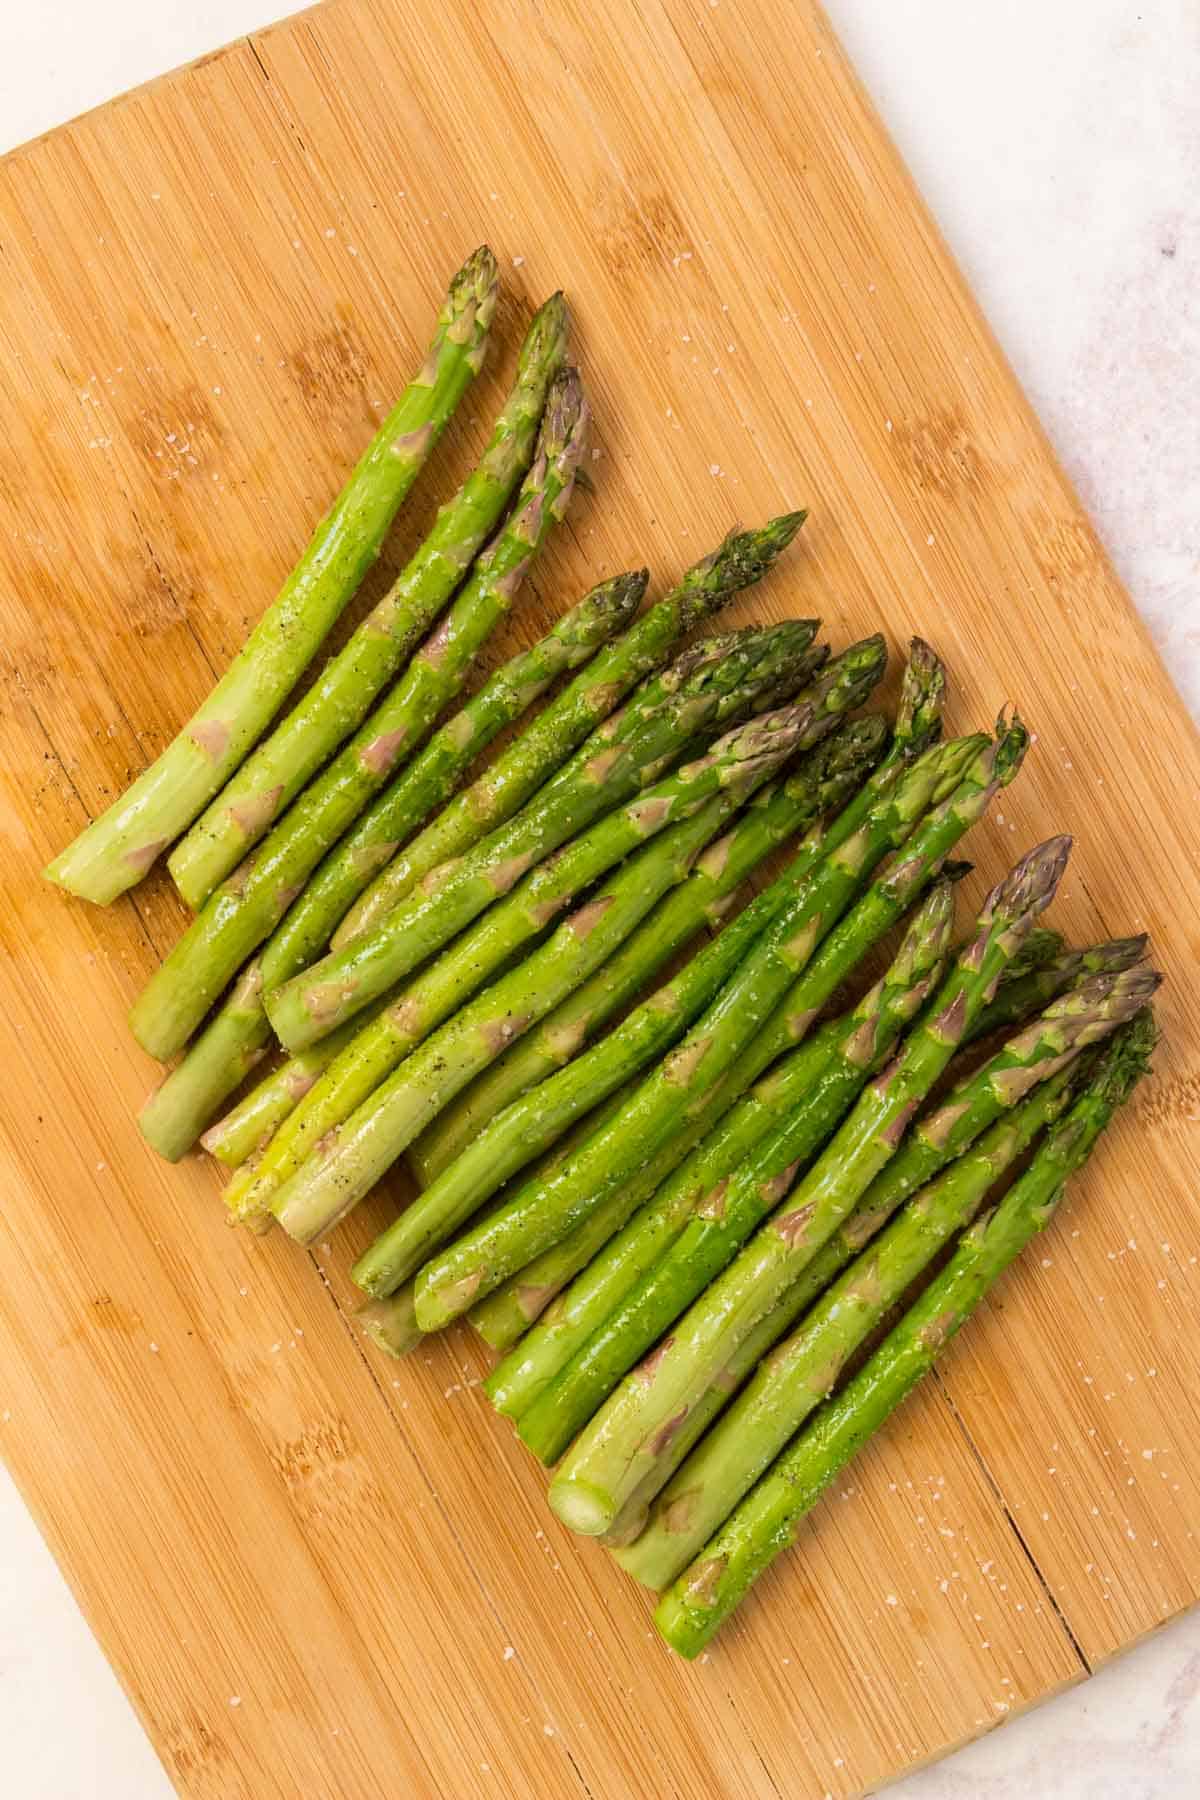 Fresh asparagus spears coated in olive oil, salt, and pepper on a cutting board.